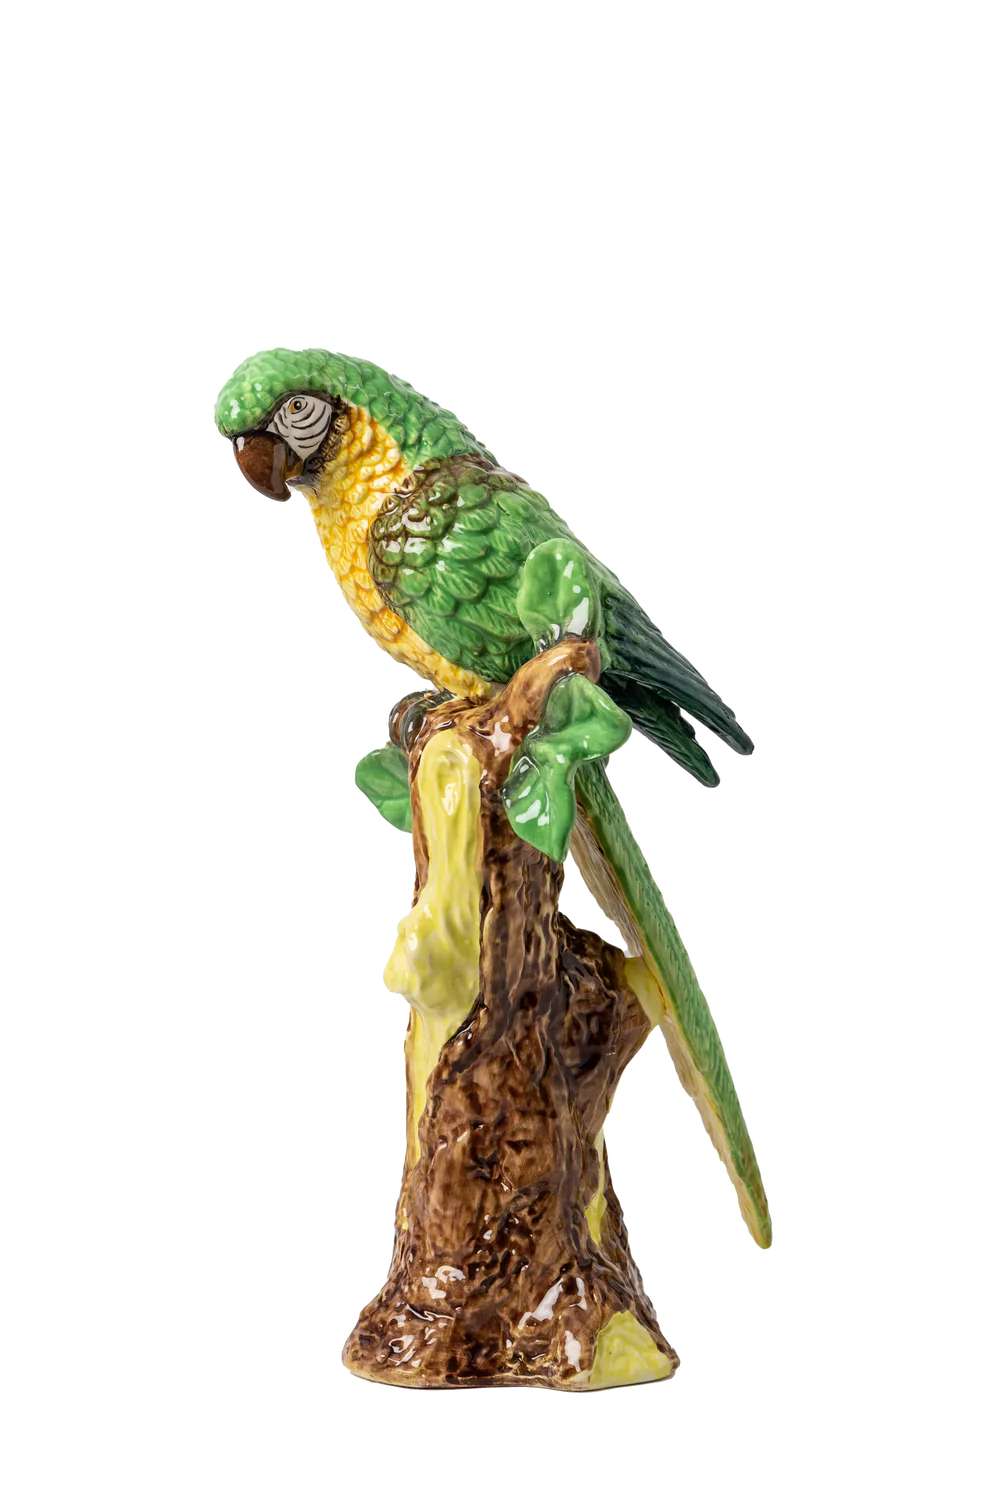 Painted Parrot